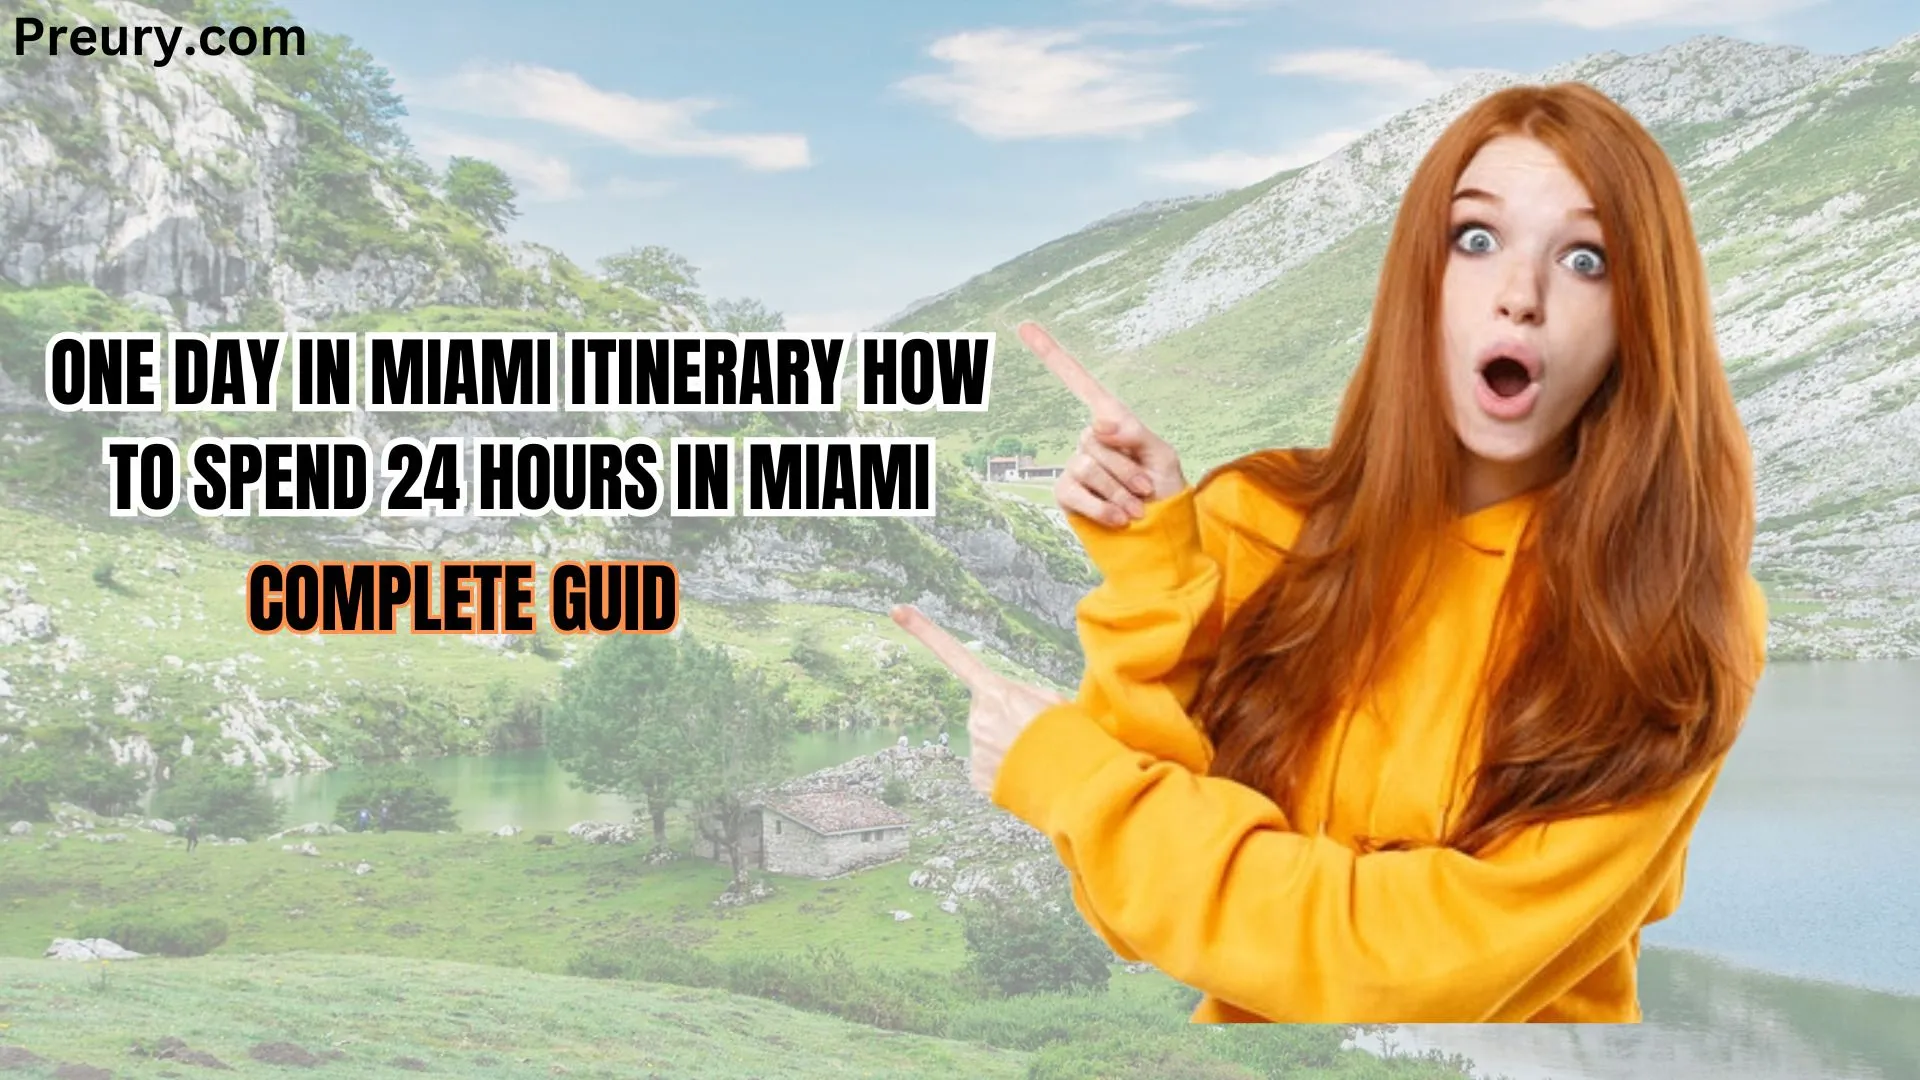 One day in Miami itinerary how to spend 24 hours in Miami